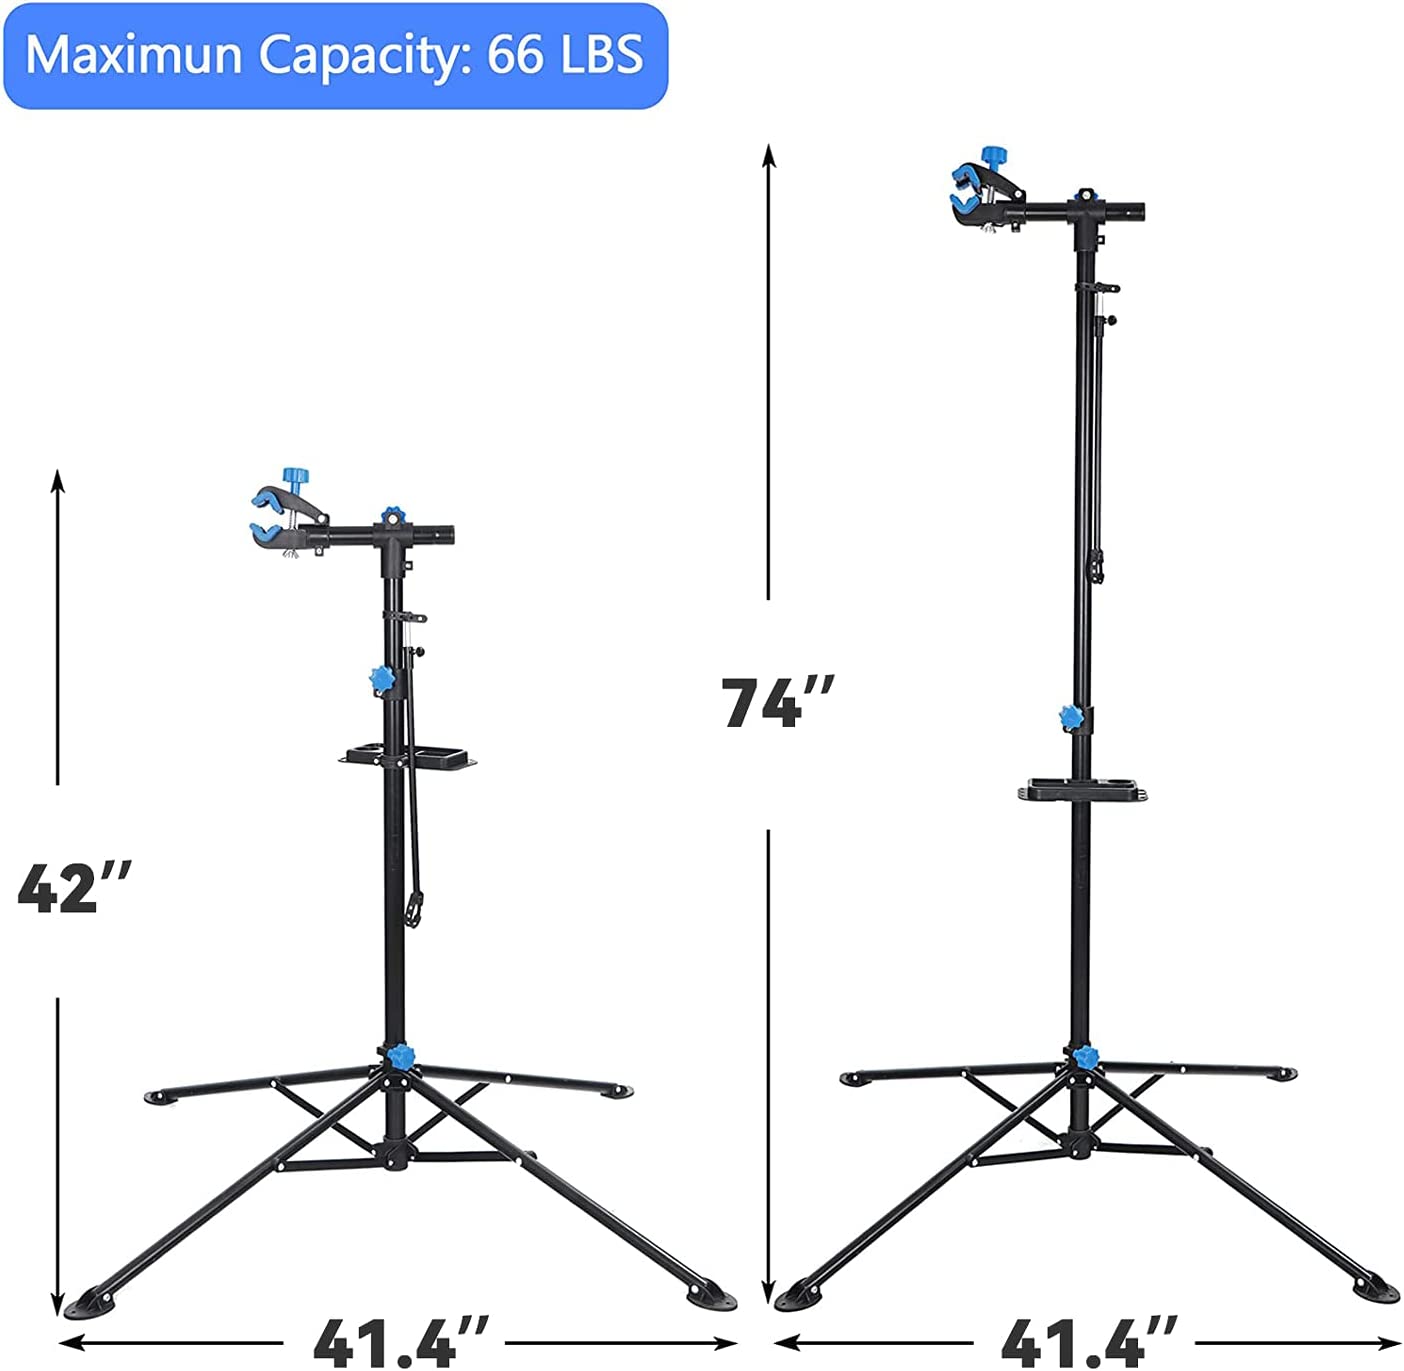 Adjustable Bike Repair Rack Stand Portable Quick Release Bicycle Mechanic Maintenance Workstand